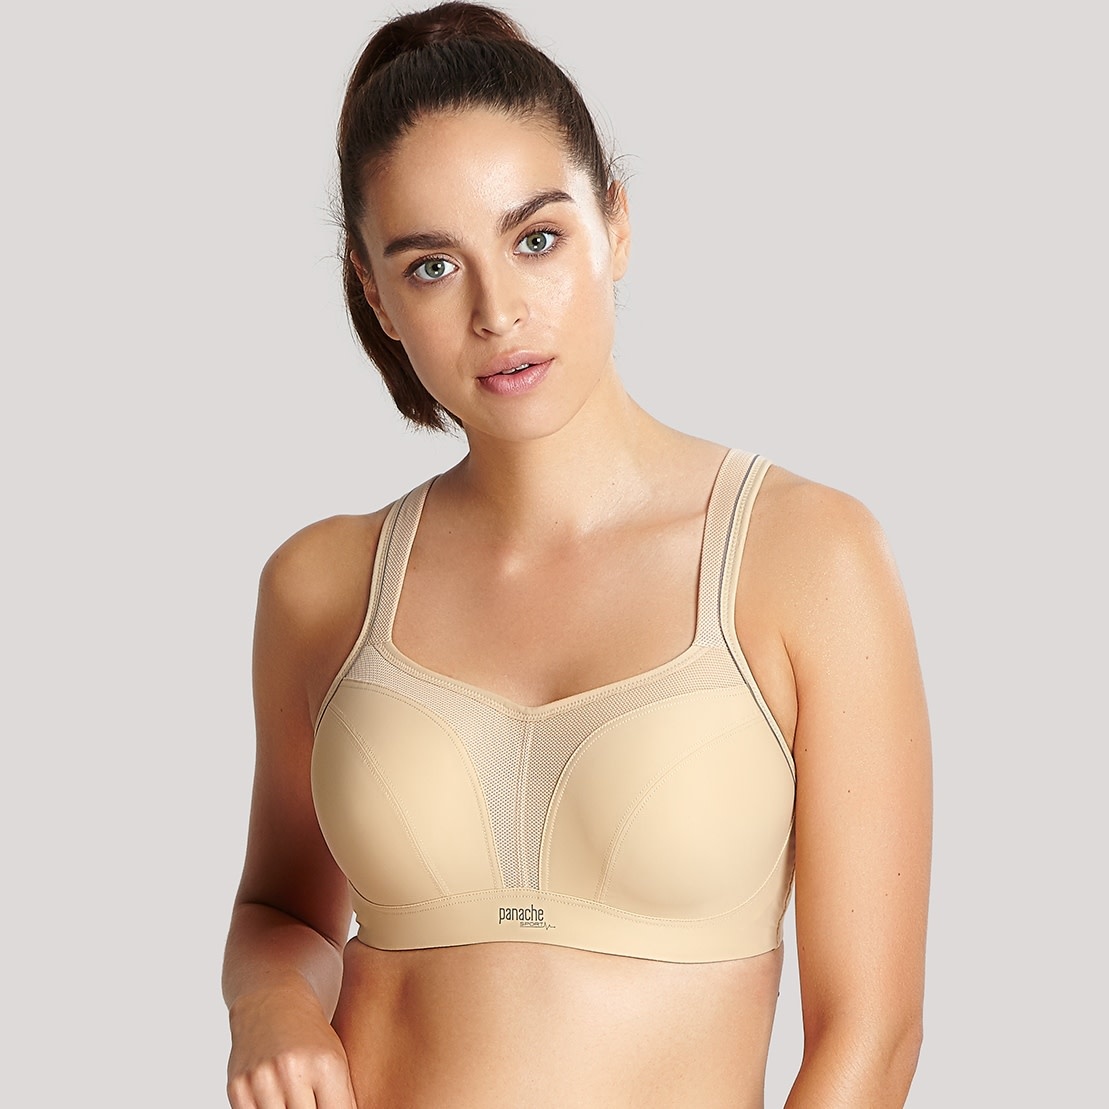 Panache Sports Bra 5021R Underwired High Impact Moulded